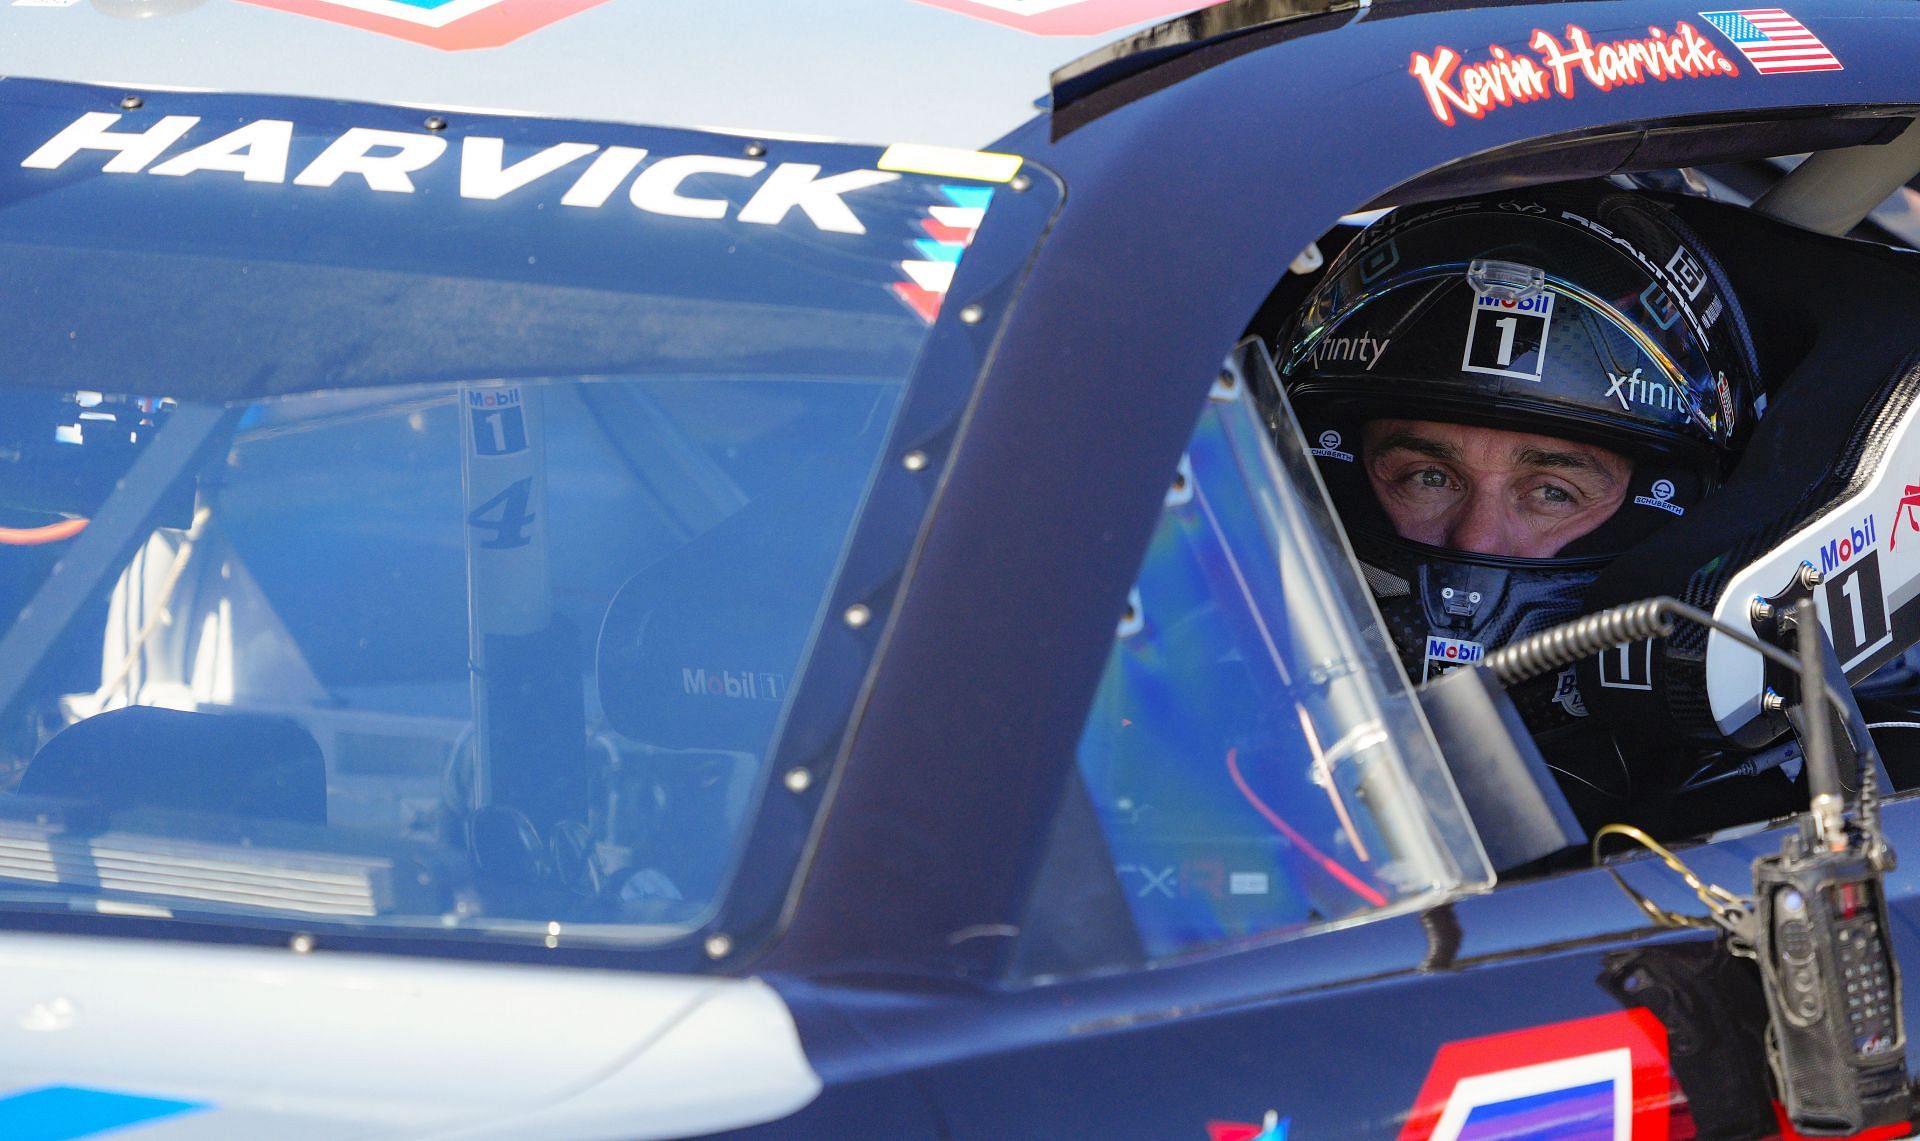 Kevin Harvick sits in his car during qualifying for the NASCAR Cup Series Toyota Owners 400 at Richmond Raceway.